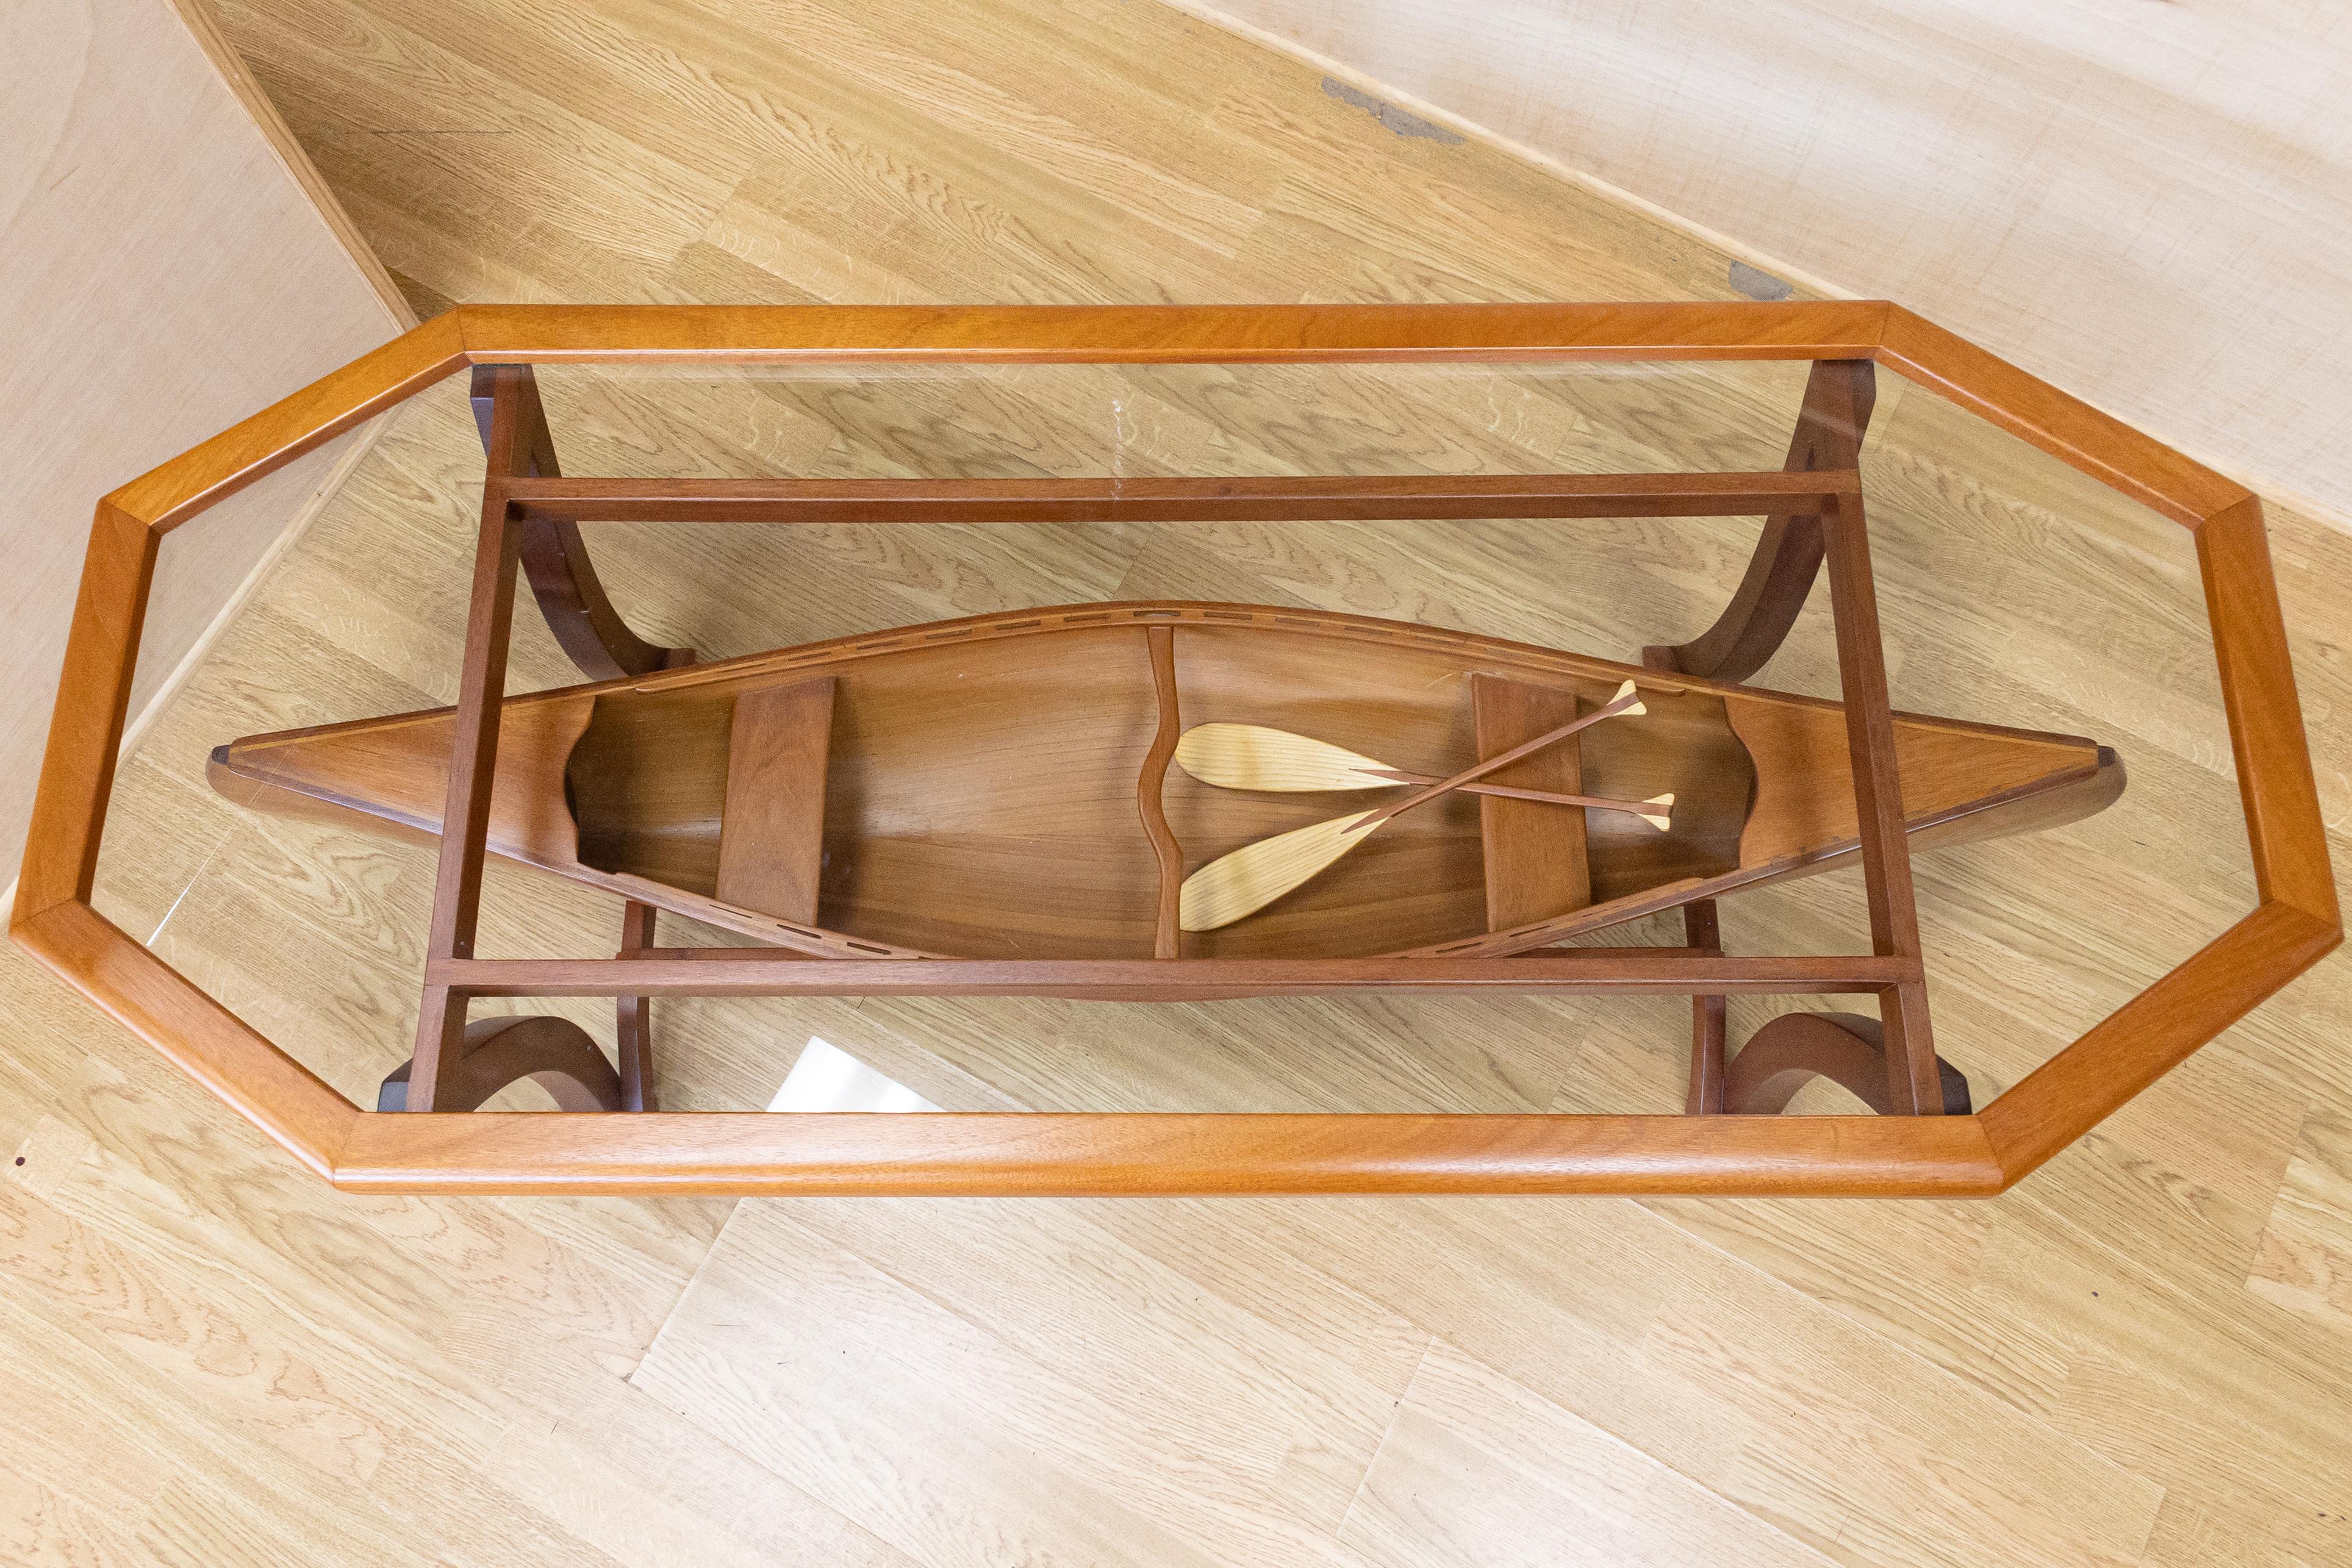 A very unique, custom made wood and glass boat table. This piece is made up of three pieces; the table top glass with wood frame, the canoe with paddles, and the base frame. Each of these items sit together without assembly. This item is in very